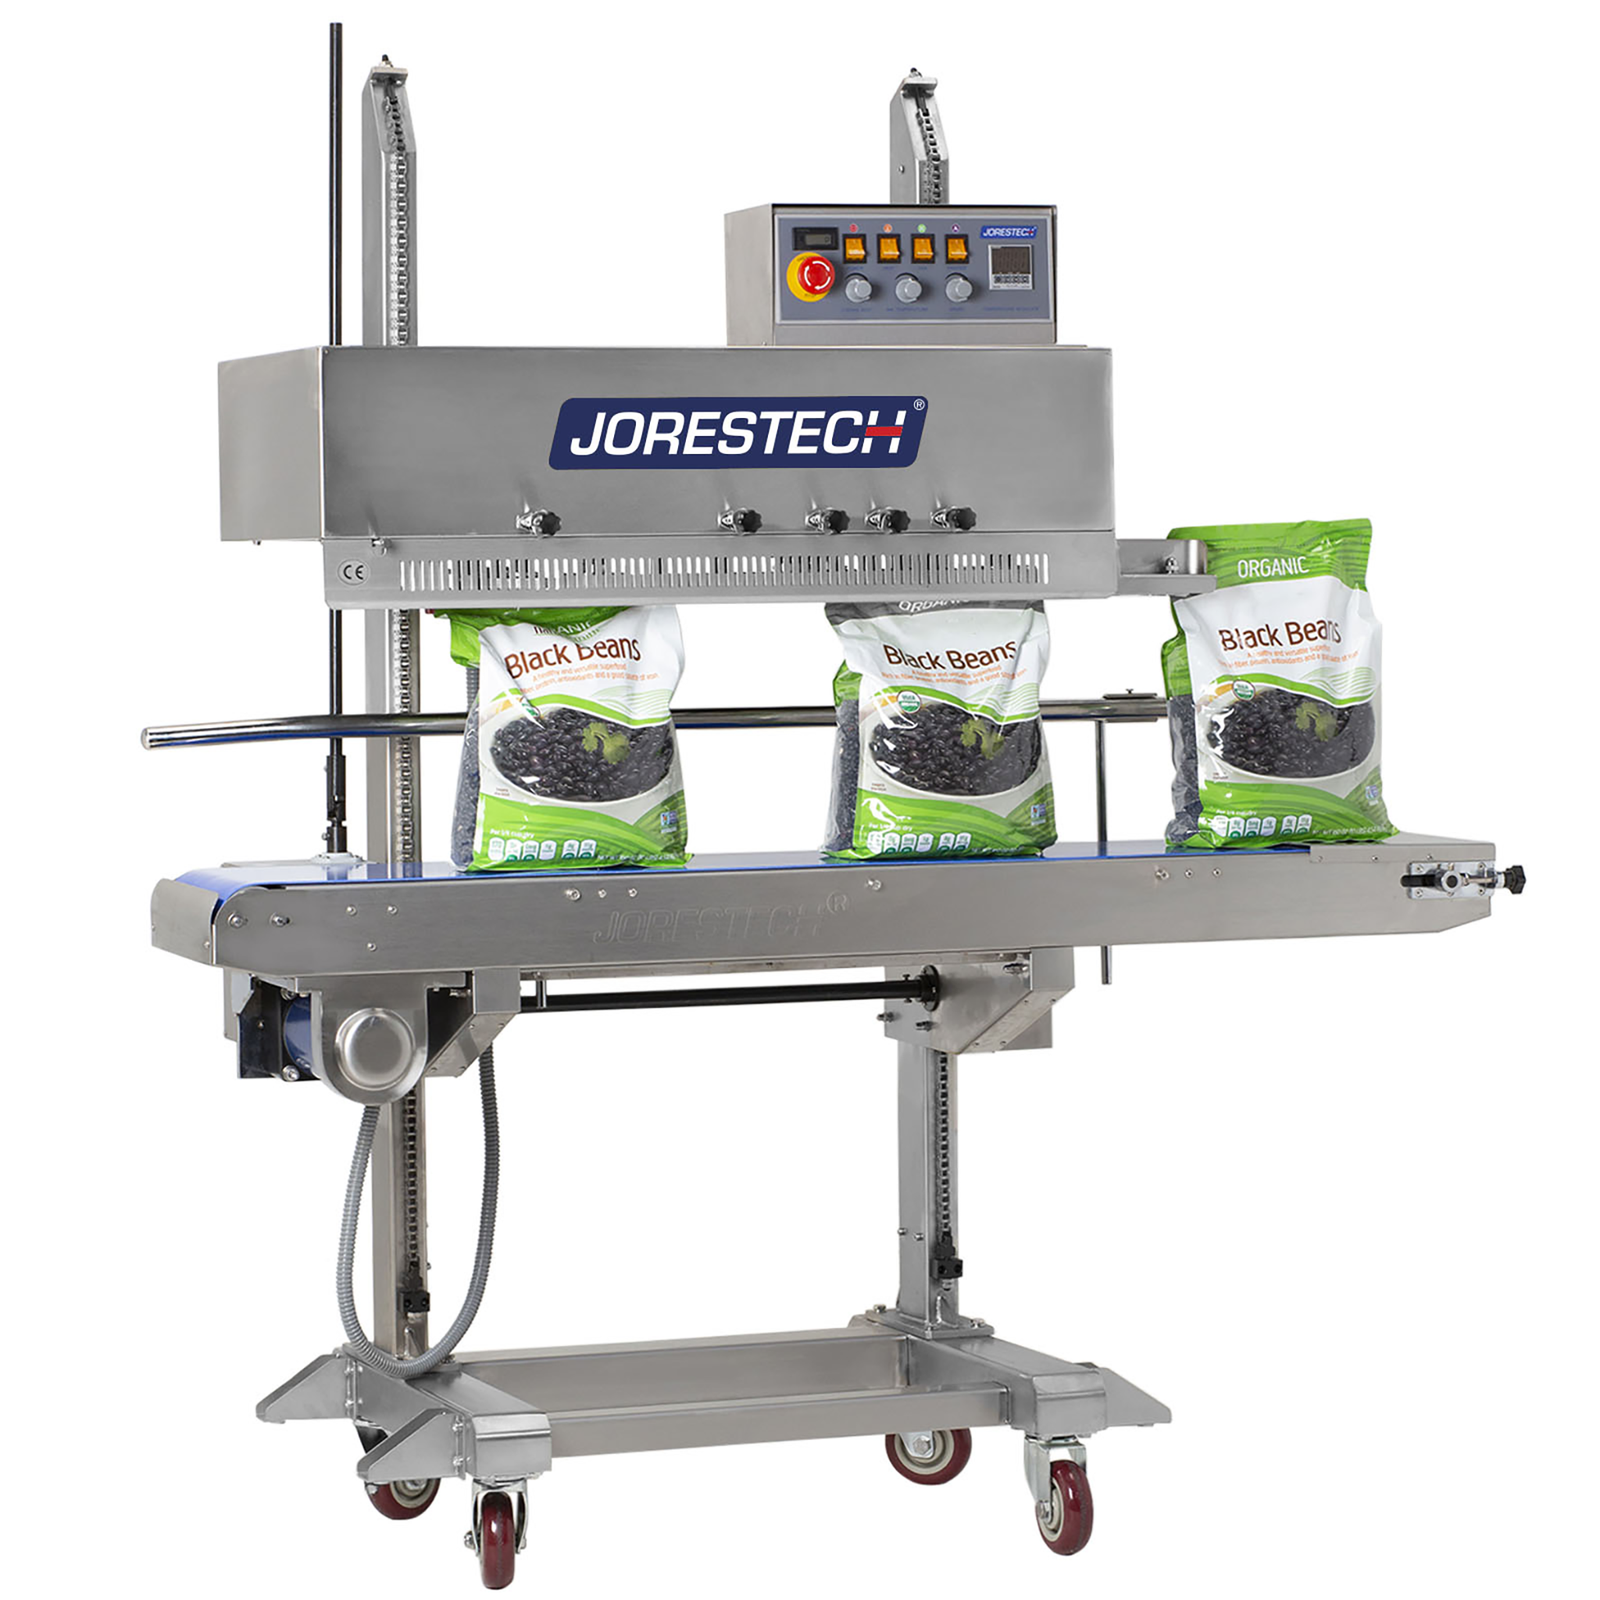 Stainless steel JORES TECHNOLOGIES® vertical continuous band sealer with coder and blue JORESTECH logo and emergency red stop button sealing a production of large plastic bags filled with black beans